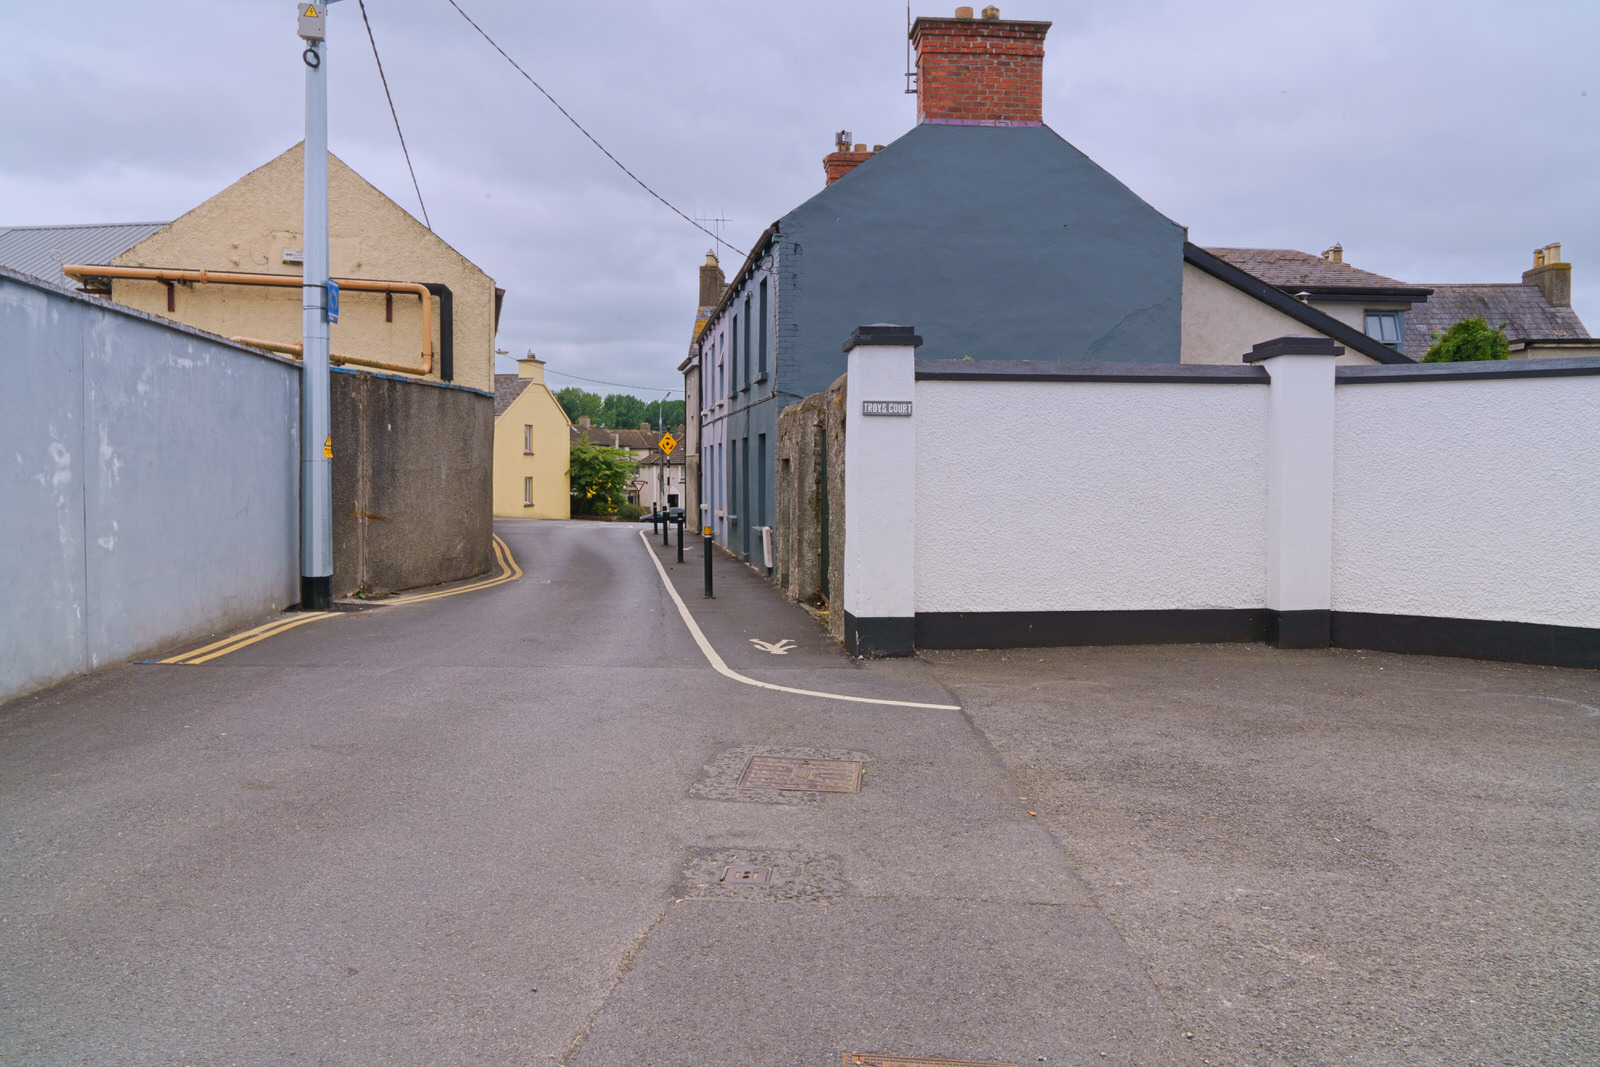 IN 2018 I EXPLORED A NARROW LANE NETWORK IN KILKENNY [DEAN STREET TO BUTT'S GREEN]-234286-1